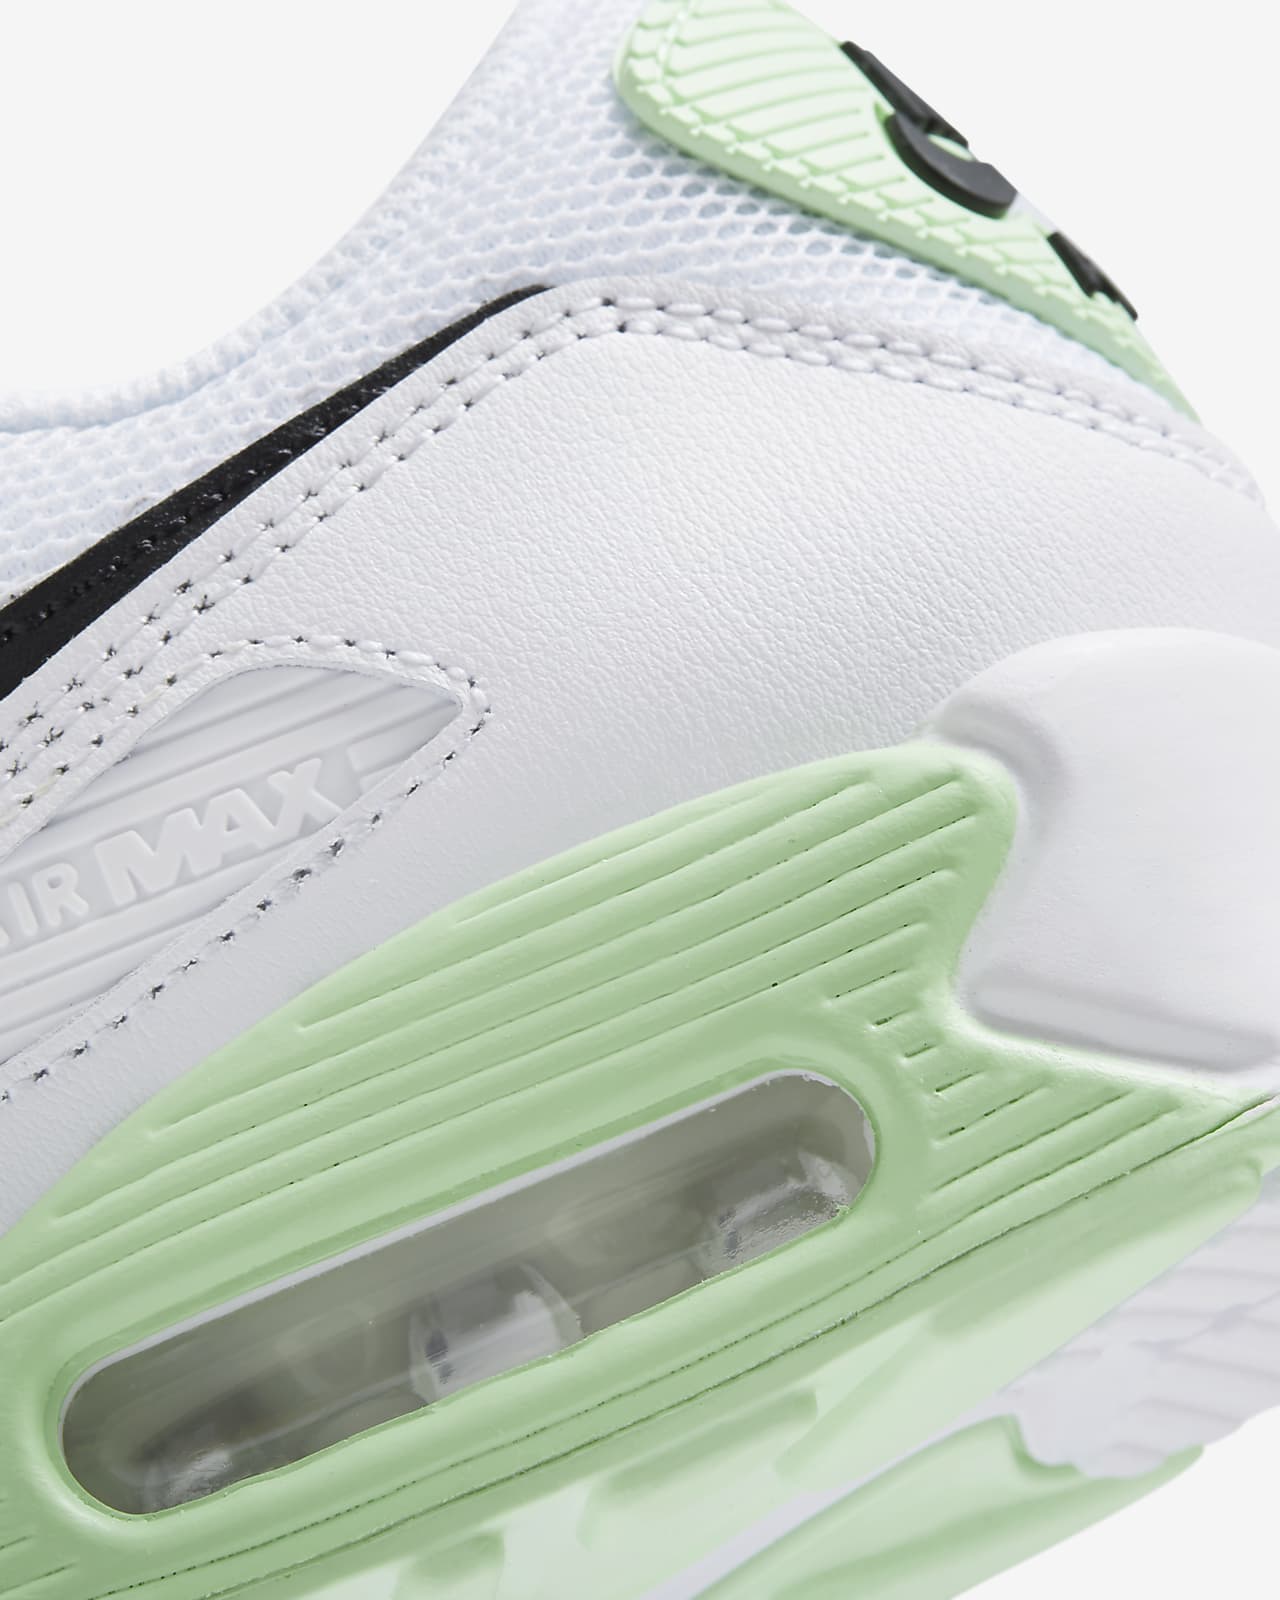 nike air max 90 white and green sneakers